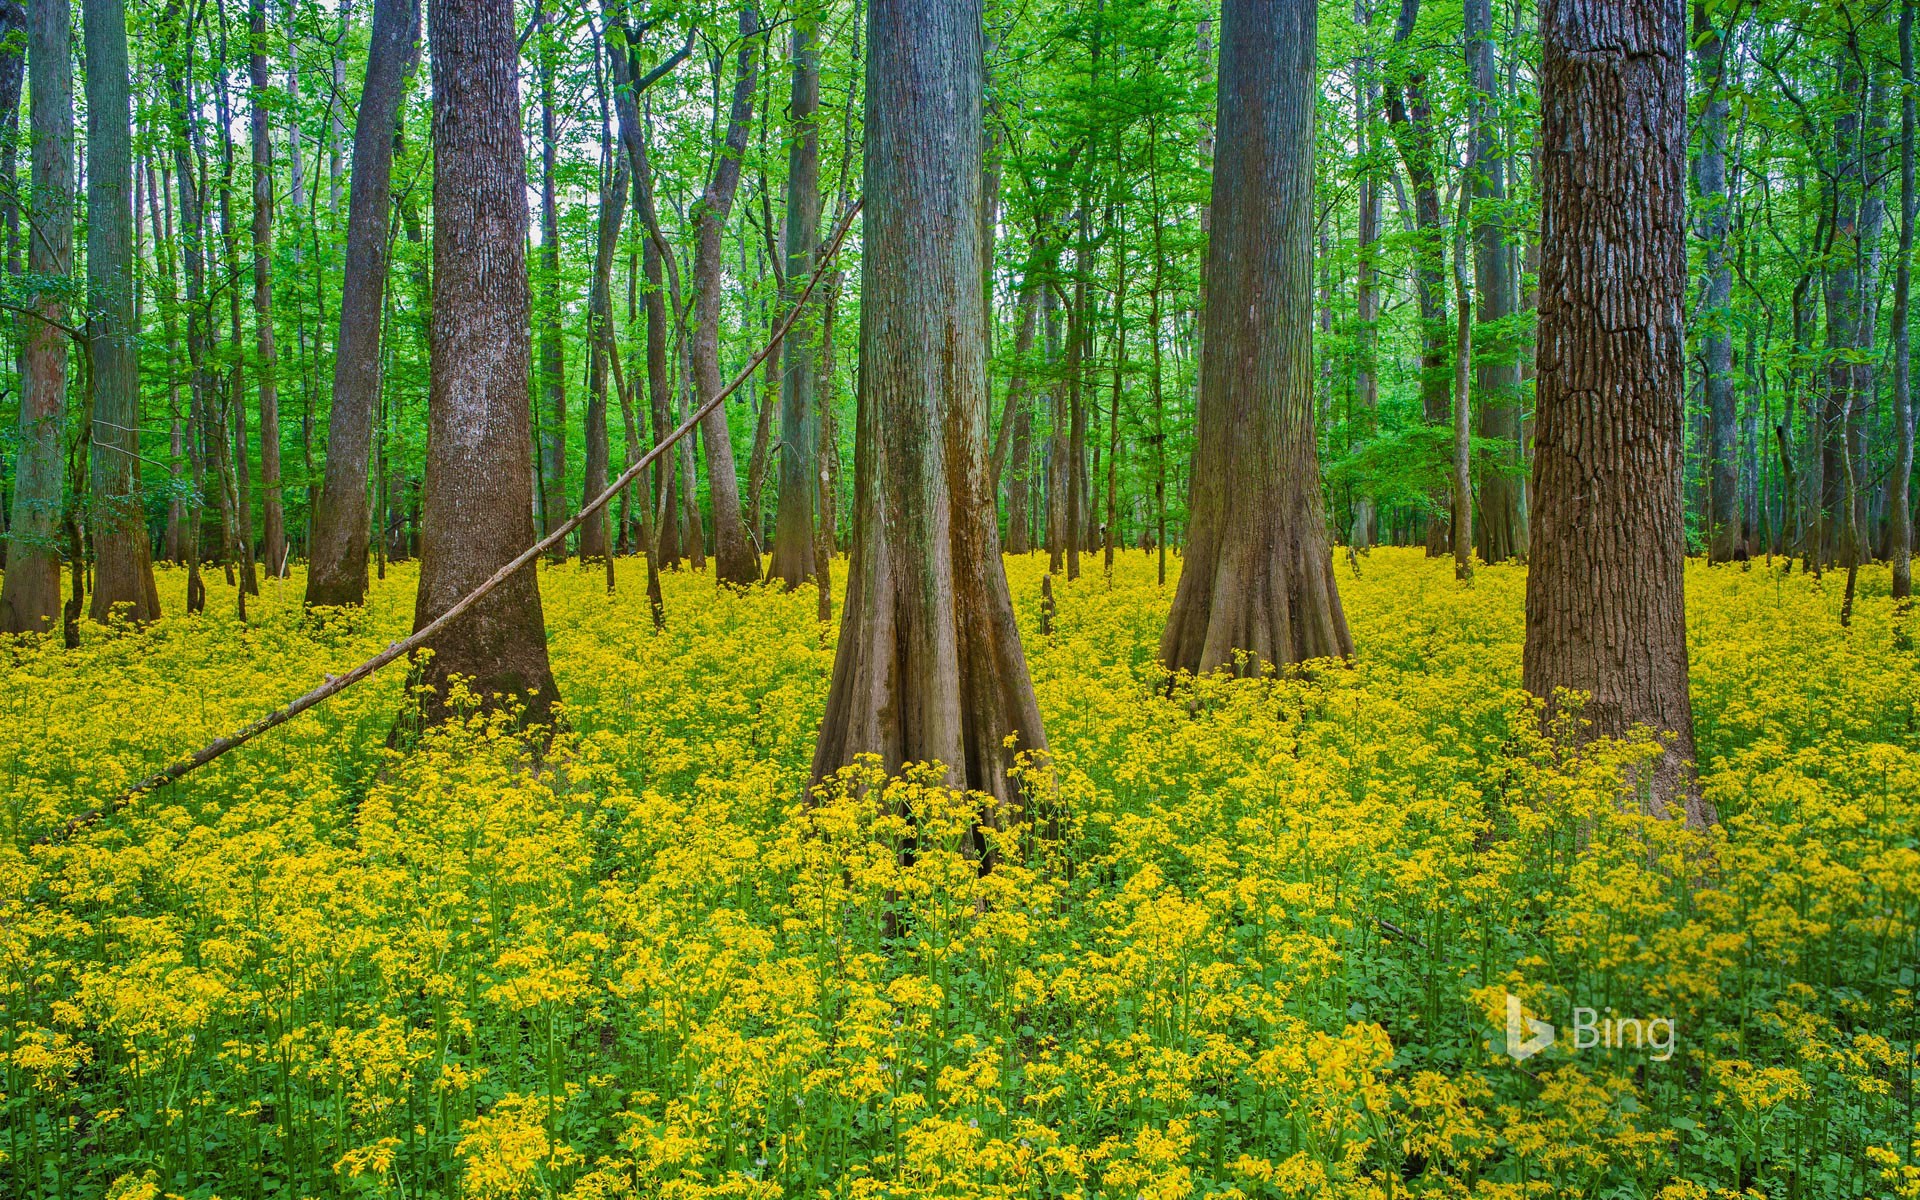 Blooming butterweed in Congaree National Park, South Carolina